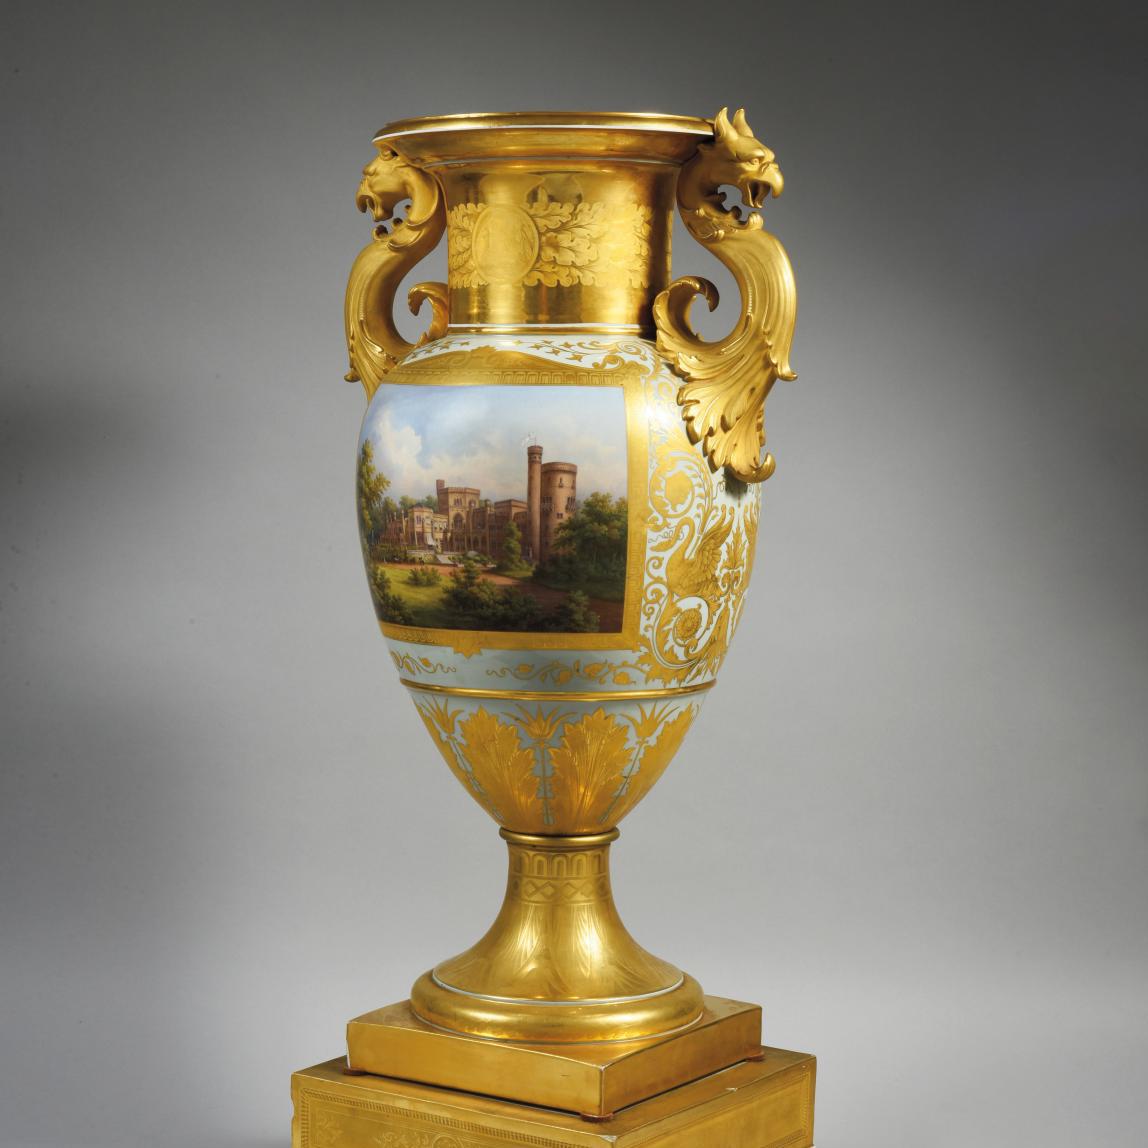 A Porcelain Palace from the Royal Porcelain Manufactory Berlin - Pre-sale